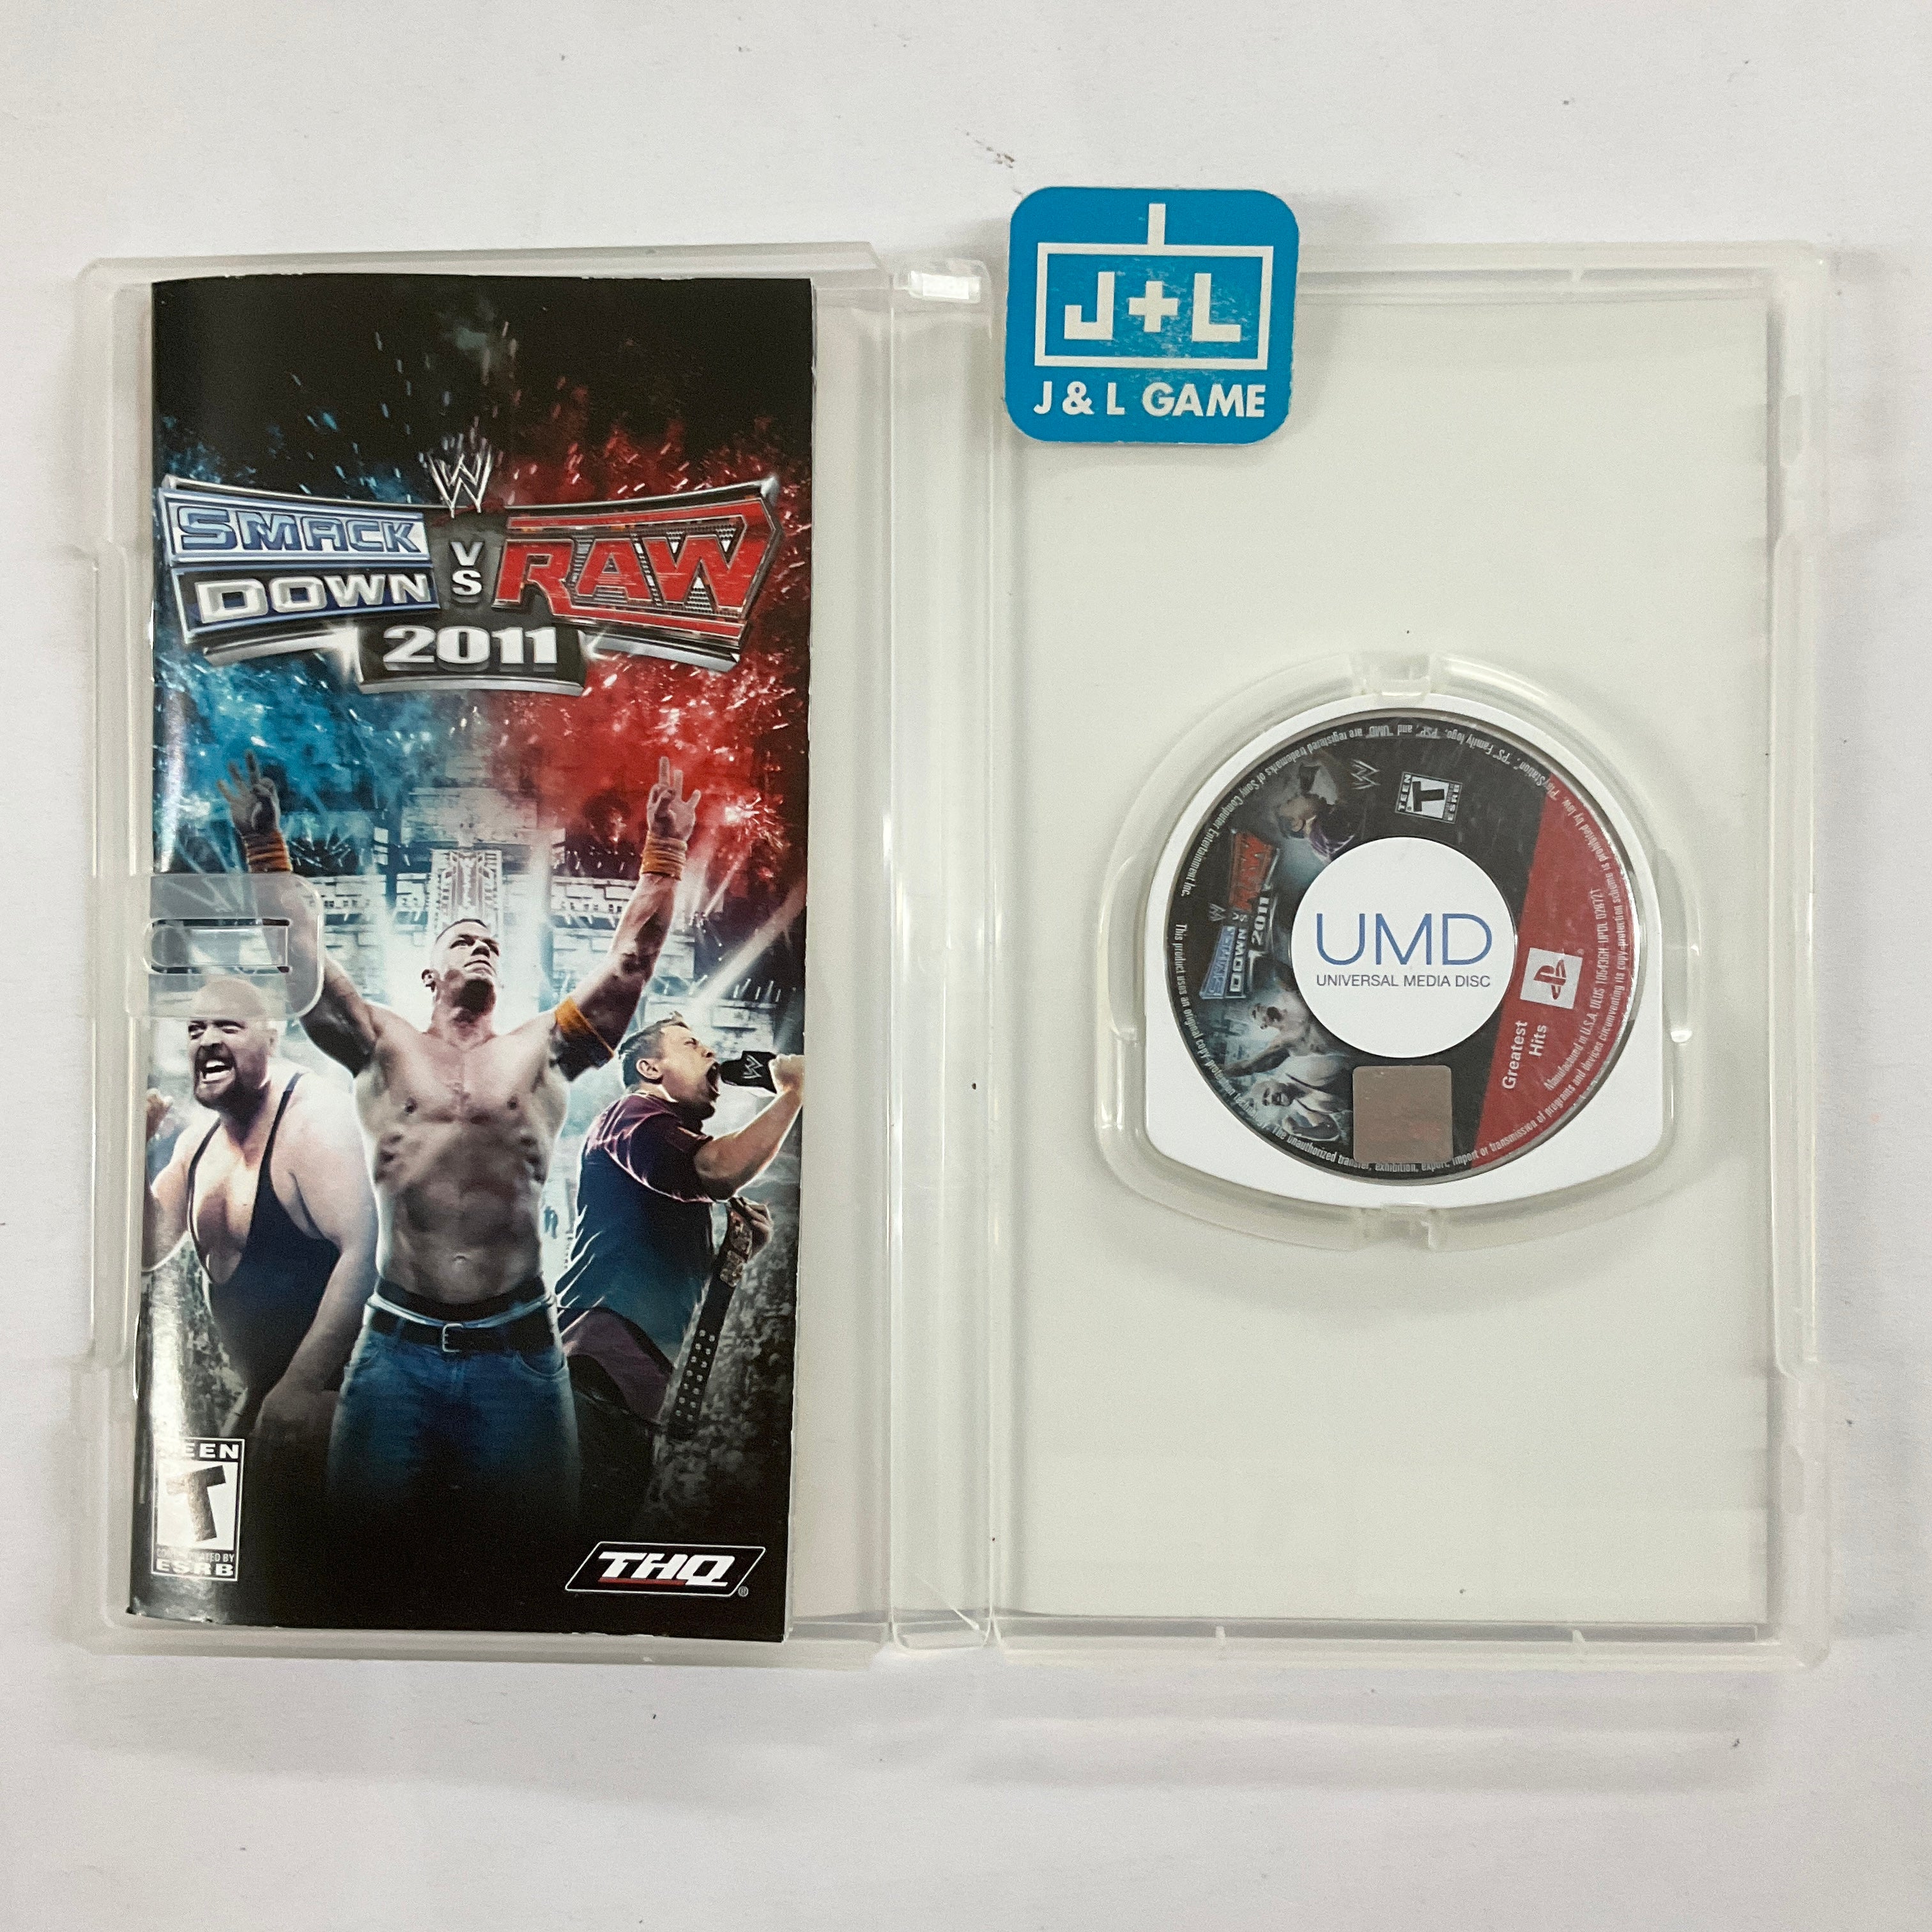 WWE SmackDown vs. Raw 2011 (Greatest Hits) - Sony PSP [Pre-Owned] Video Games THQ   